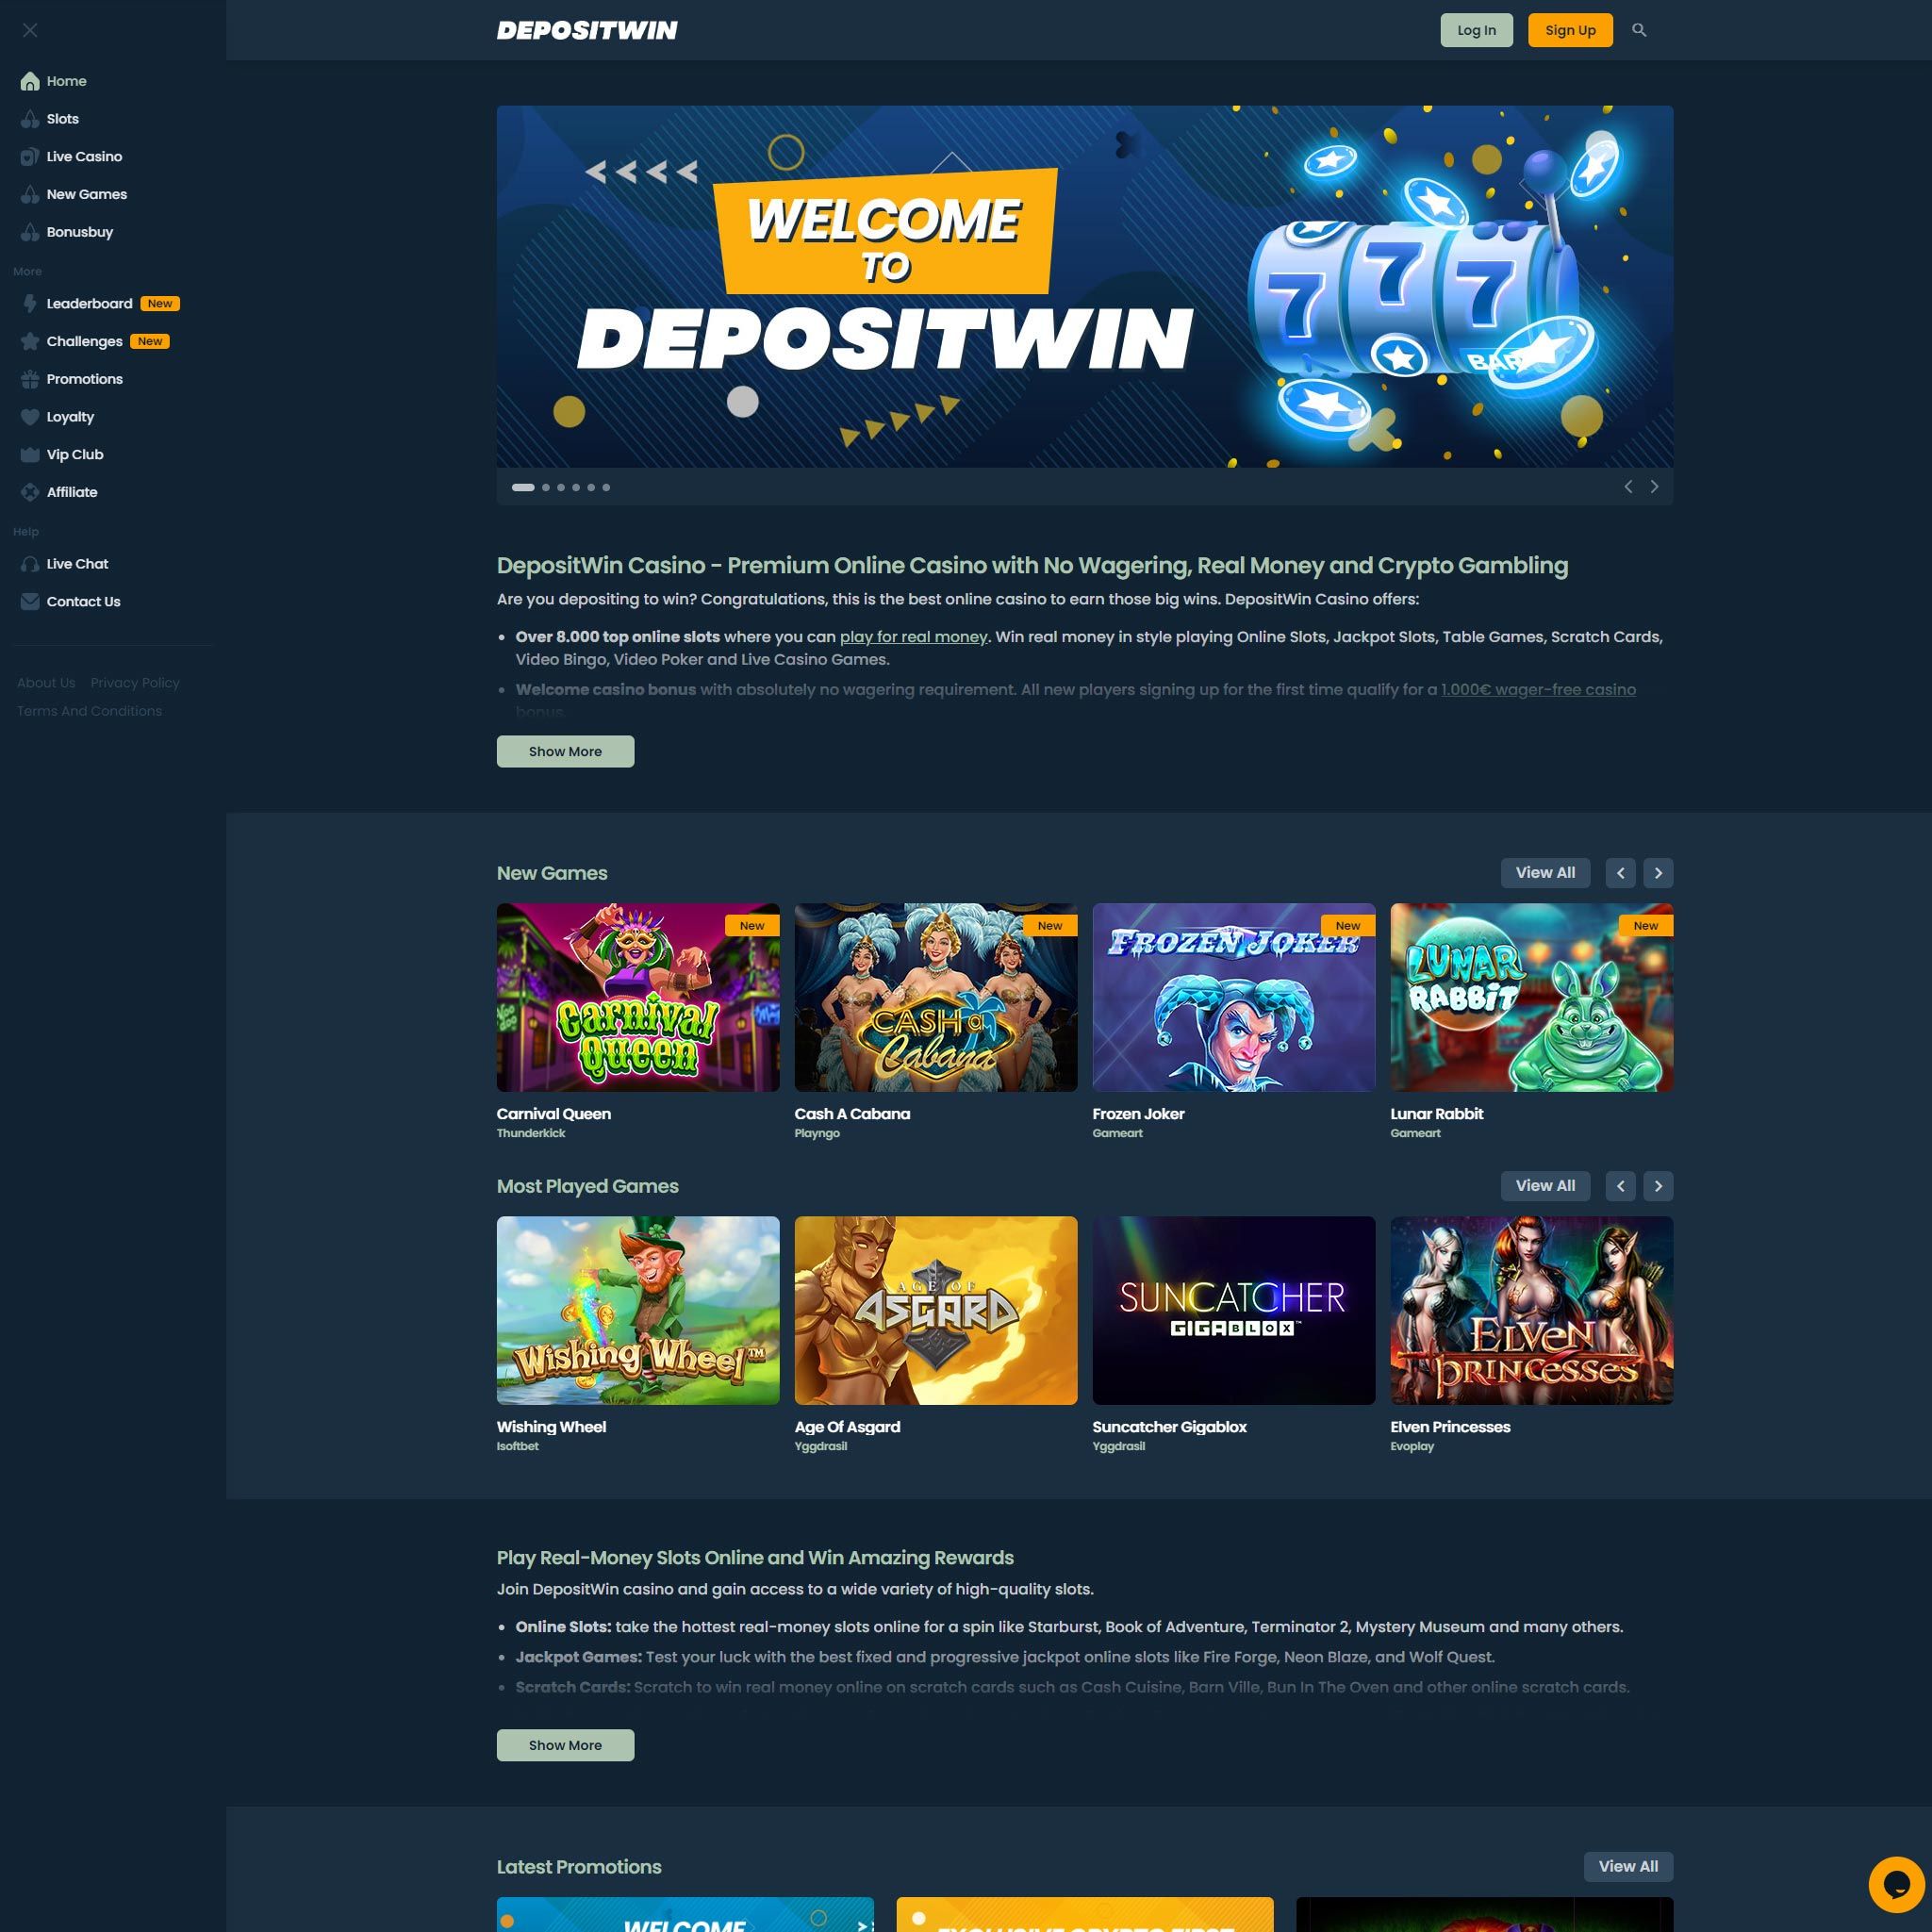 DepositWin Casino review by Mr. Gamble